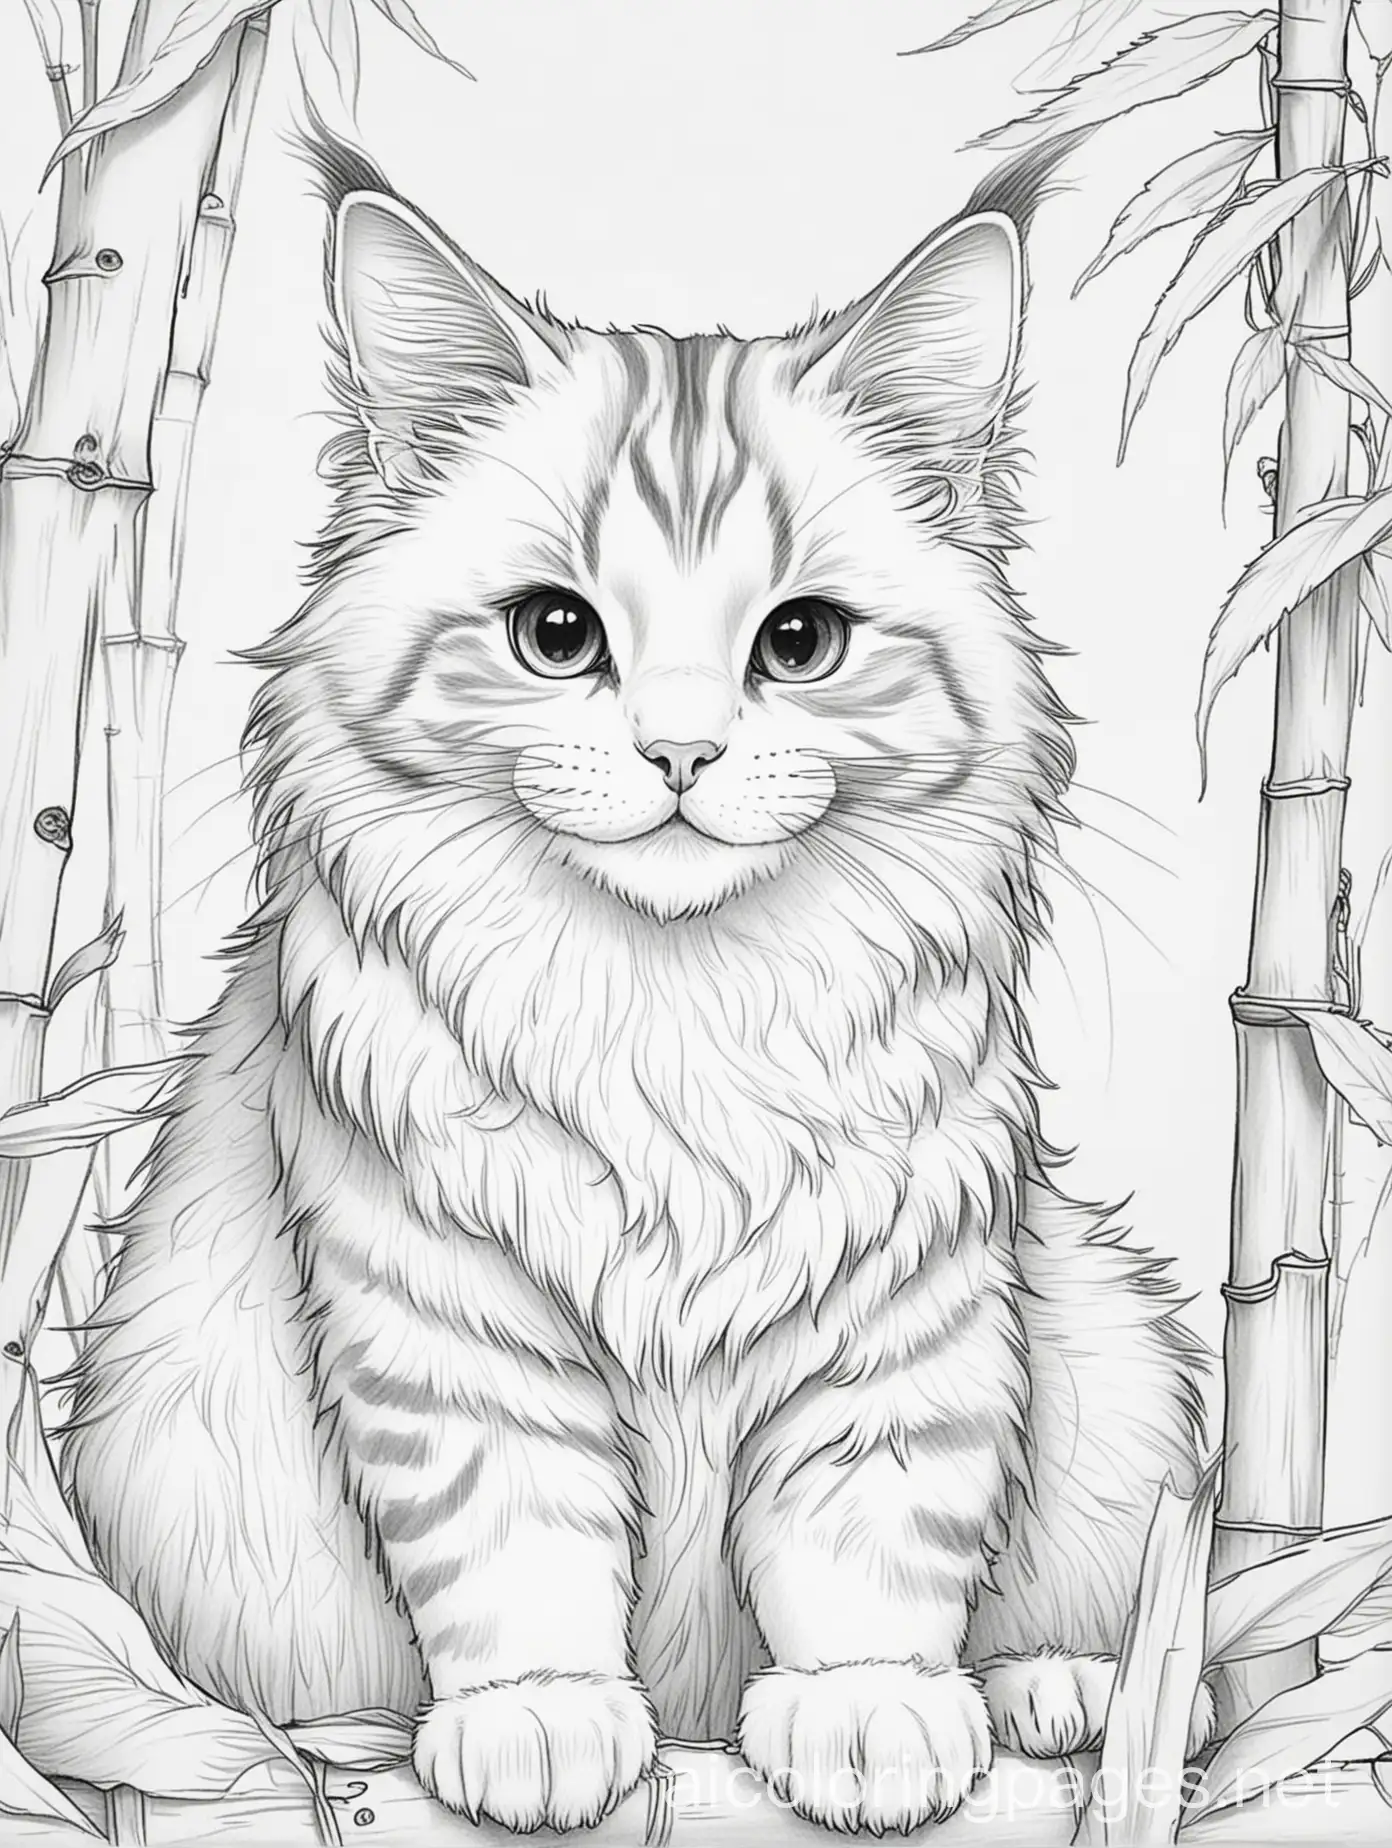 cute kawaii maine coon cat smiling and eating bamboo, Coloring Page, black and white, line art, white background, Simplicity, Ample White Space. The background of the coloring page is plain white to make it easy for young children to color within the lines. The outlines of all the subjects are easy to distinguish, making it simple for kids to color without too much difficulty, Coloring Page, black and white, line art, white background, Simplicity, Ample White Space. The background of the coloring page is plain white to make it easy for young children to color within the lines. The outlines of all the subjects are easy to distinguish, making it simple for kids to color without too much difficulty